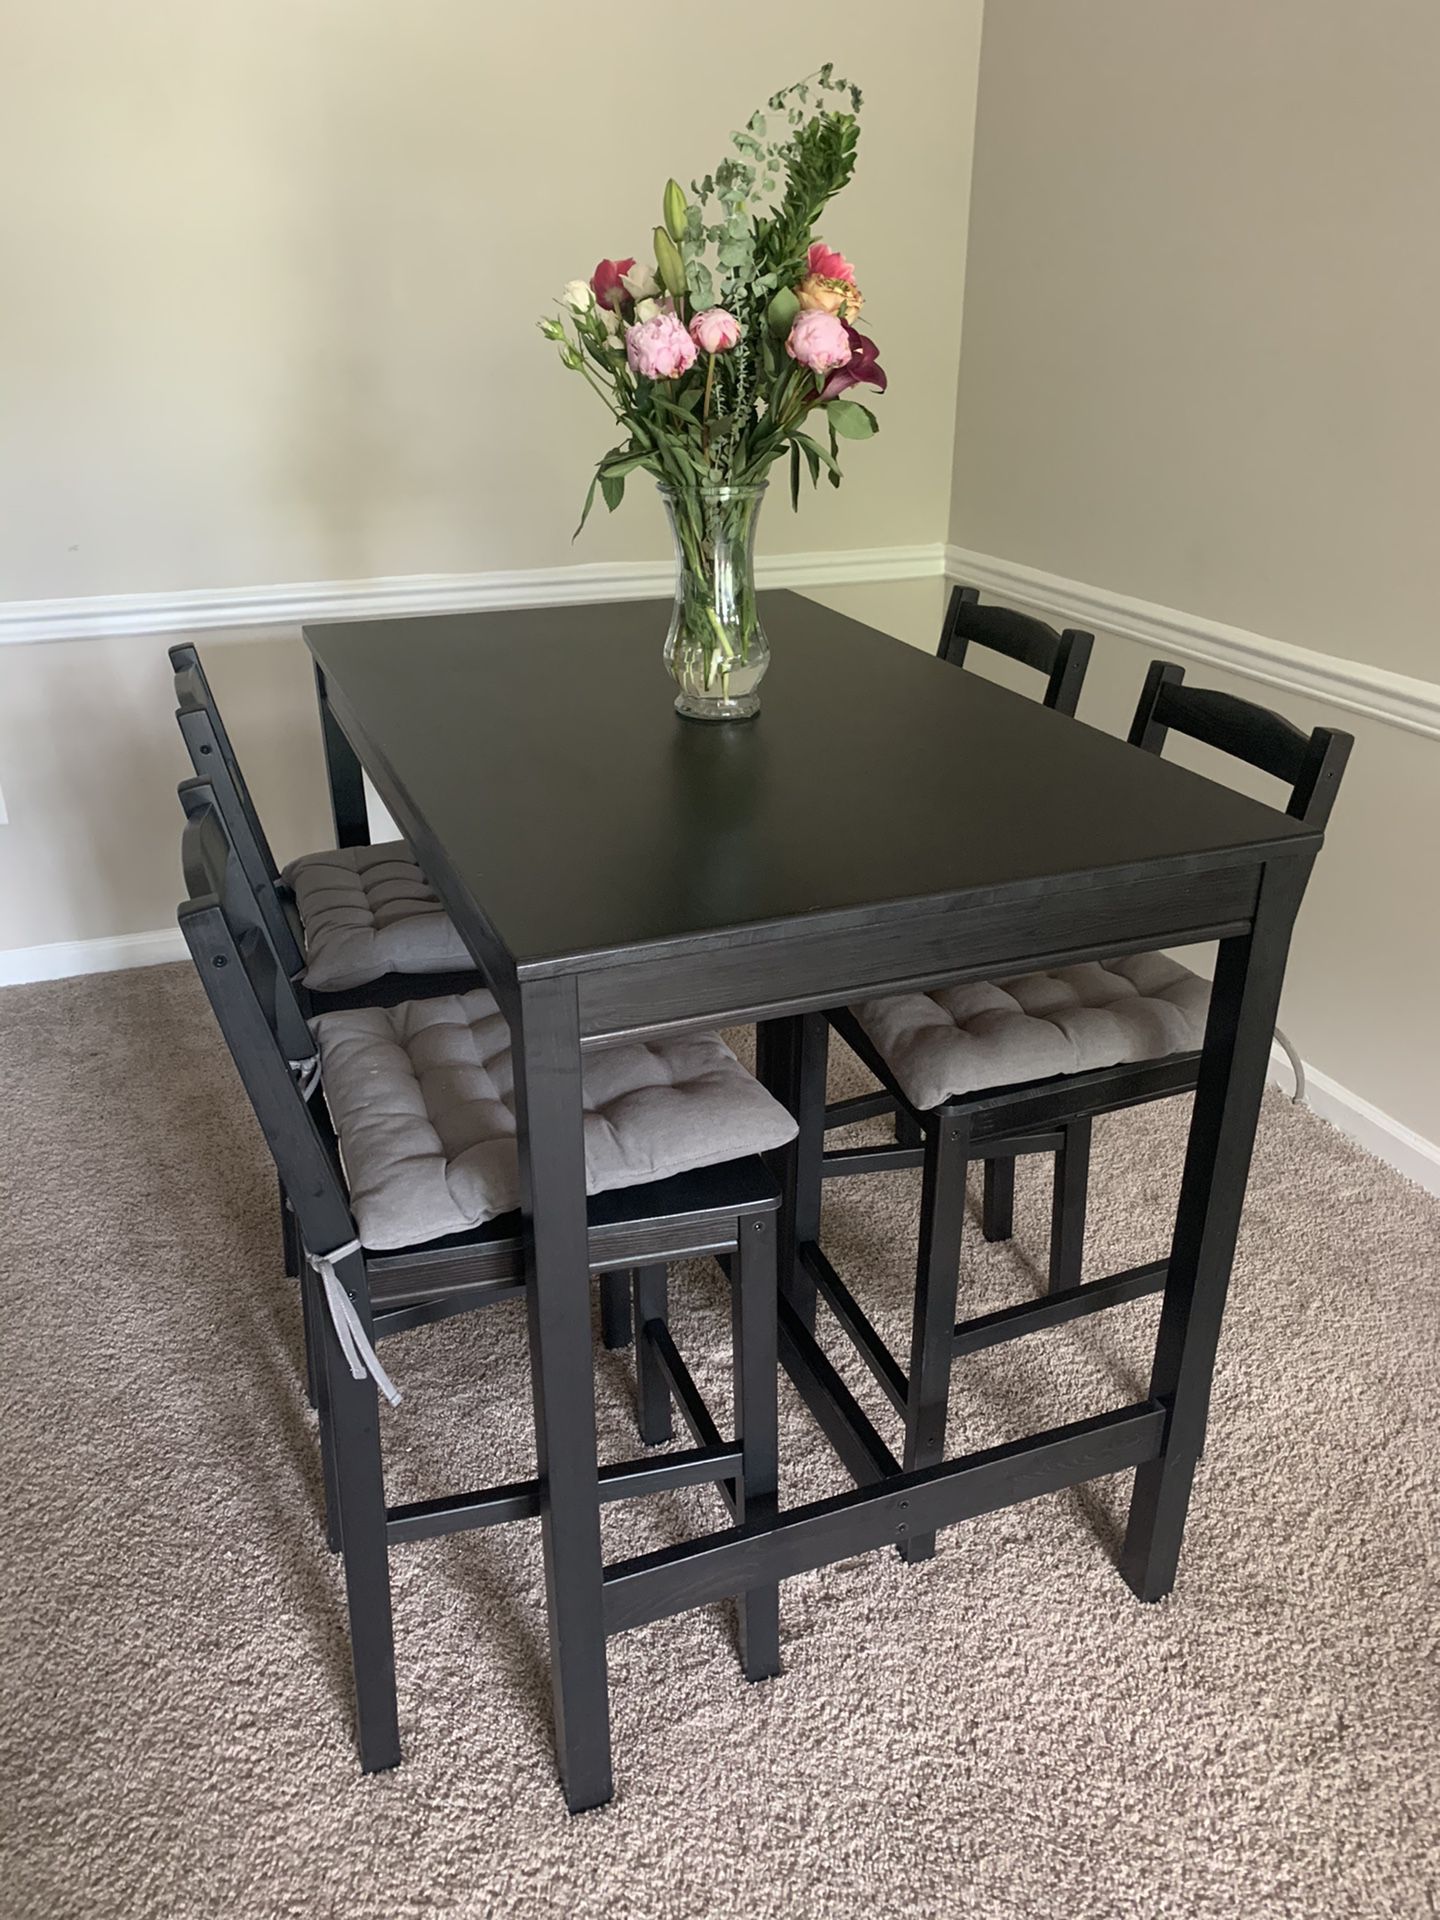 IKEA Tall Table with Chairs and Cushions